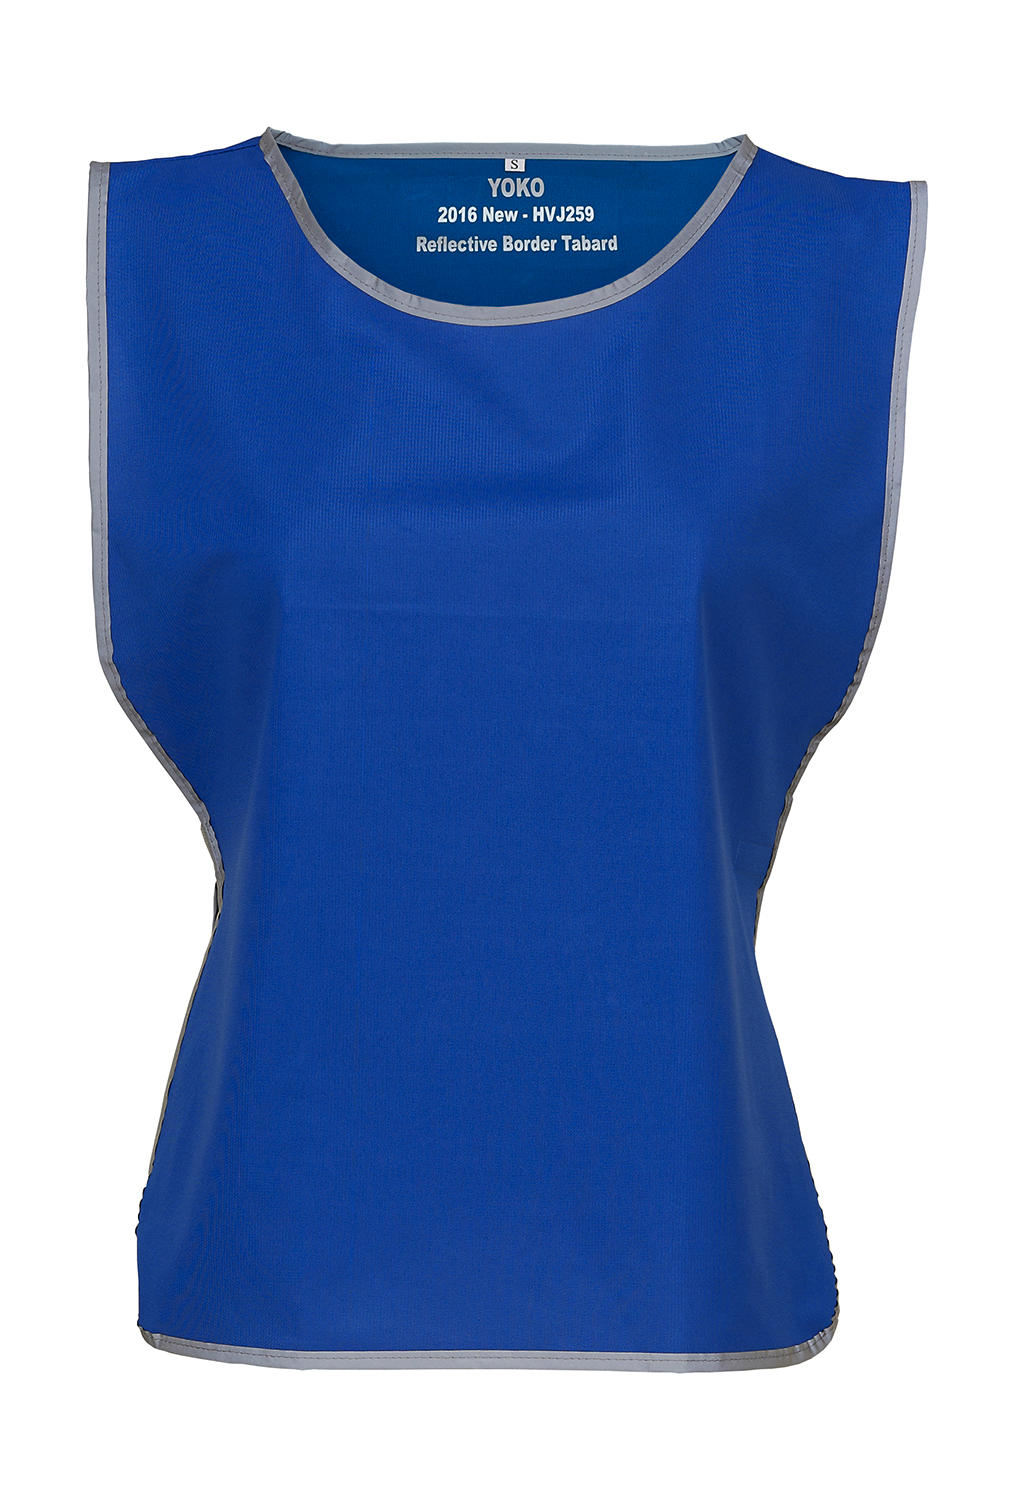  Fluo Reflective Border Tabard in Farbe Royal Blue